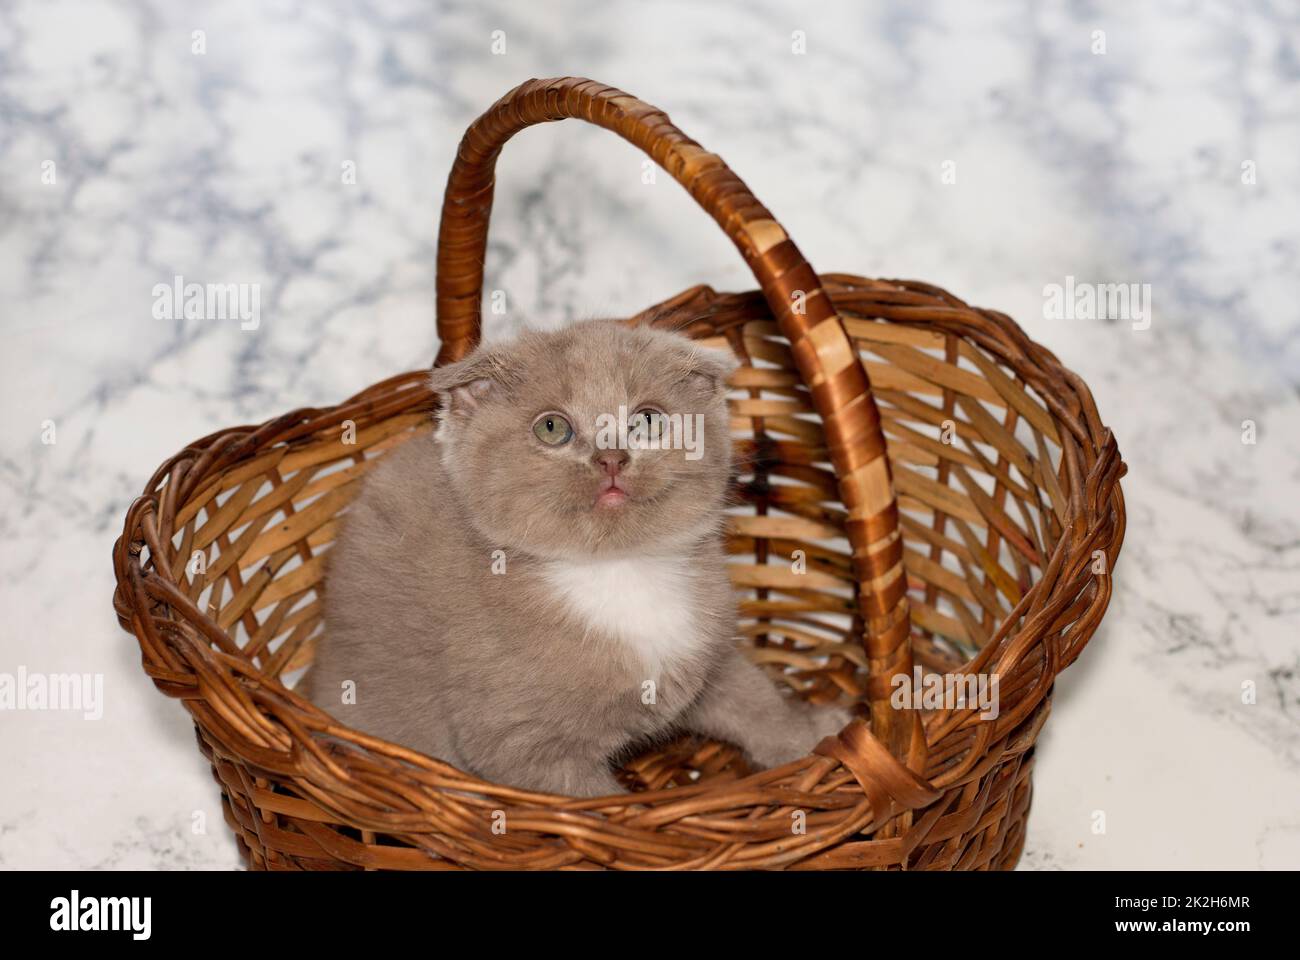 little Scottish old bicolor kitten looking out of a wicker basket Stock Photo